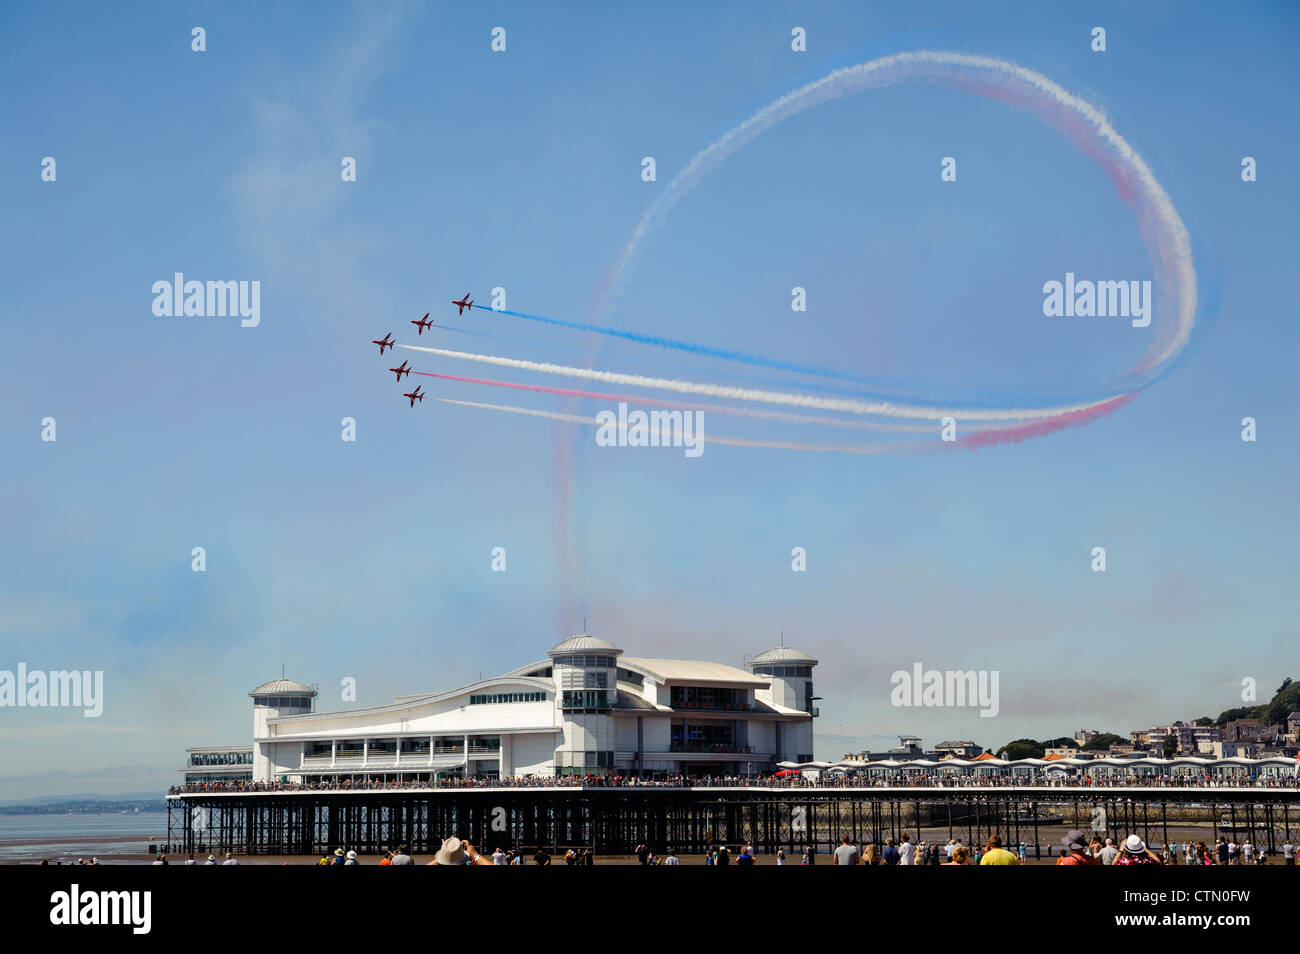 The Red Arrows perform a maneuver above the Grand Pier at Weston Super Mare. Stock Photo